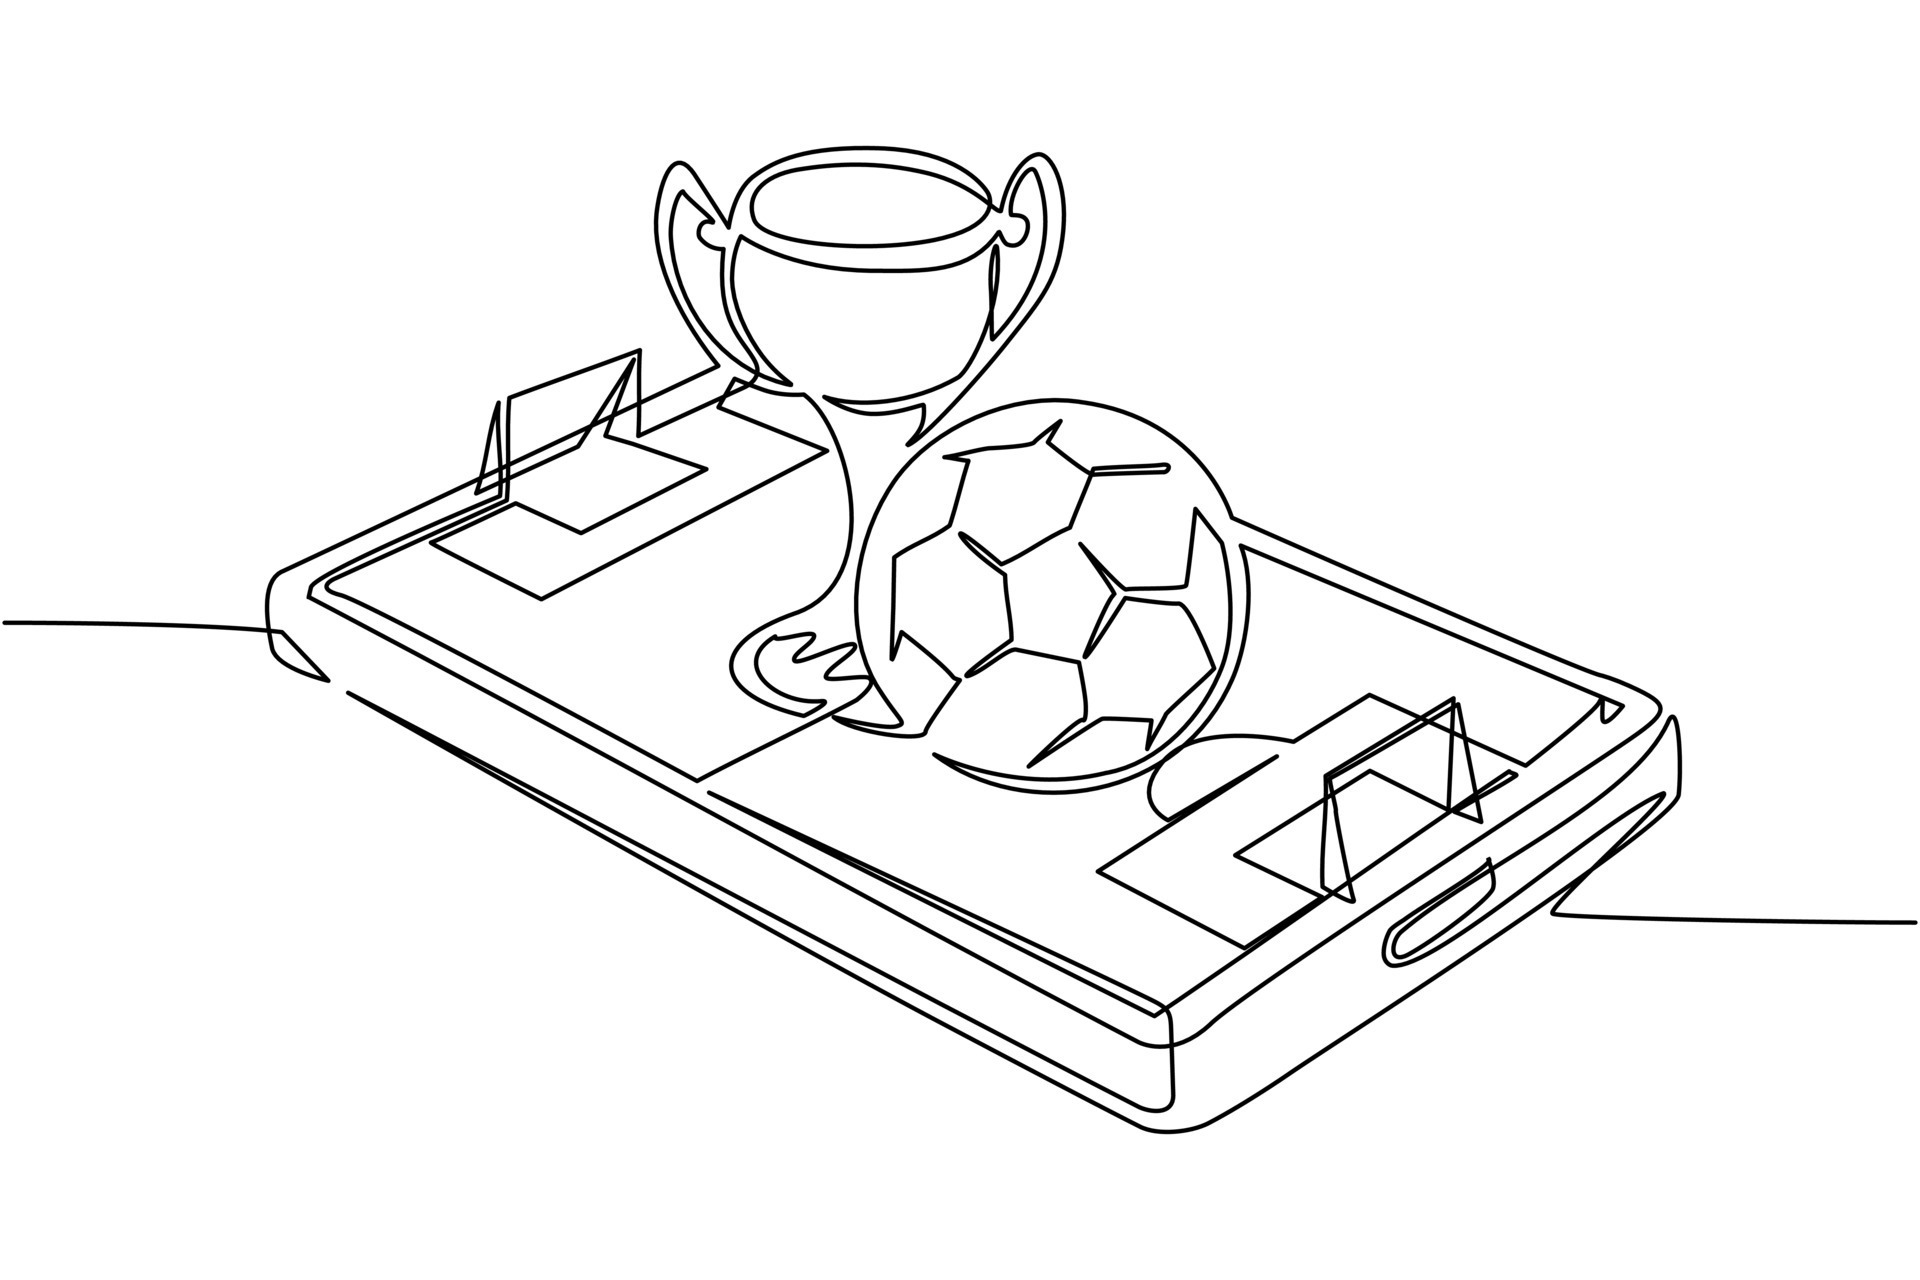 Single continuous line drawing soccer ball and trophy cup over virtual football field smartphone screen. Mobile football soccer